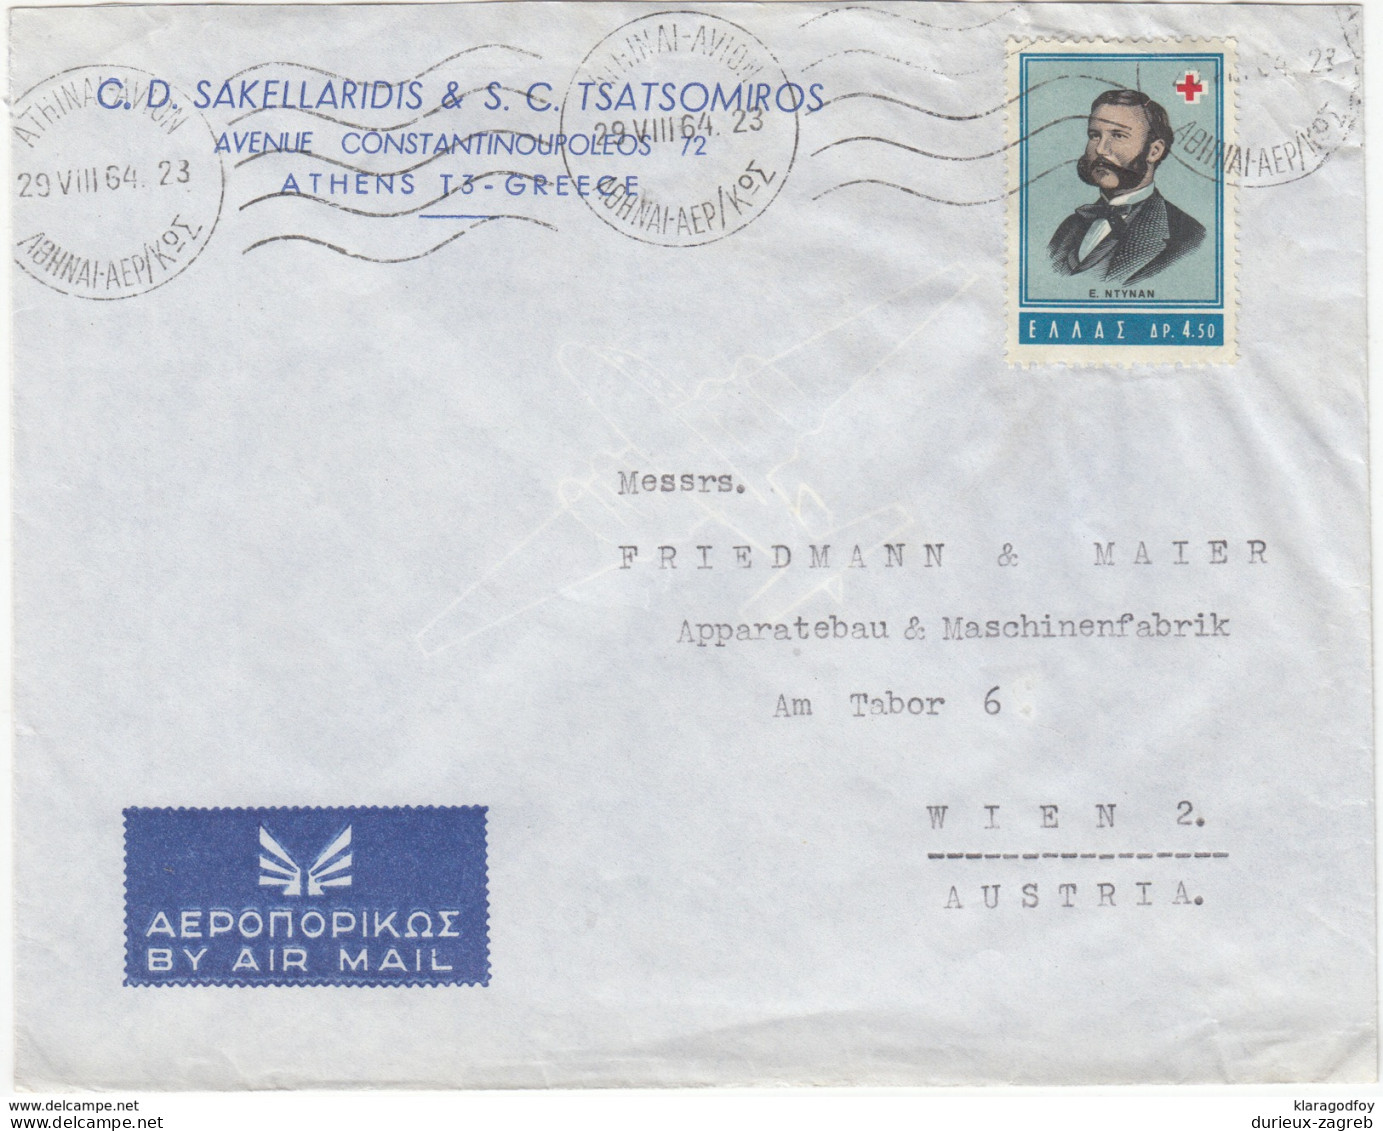 C.D. Sakellaridis & S.C. Tsatsomiros Company Air Mail Letter Cover Travelled 1964 To Austria B171005 - Covers & Documents